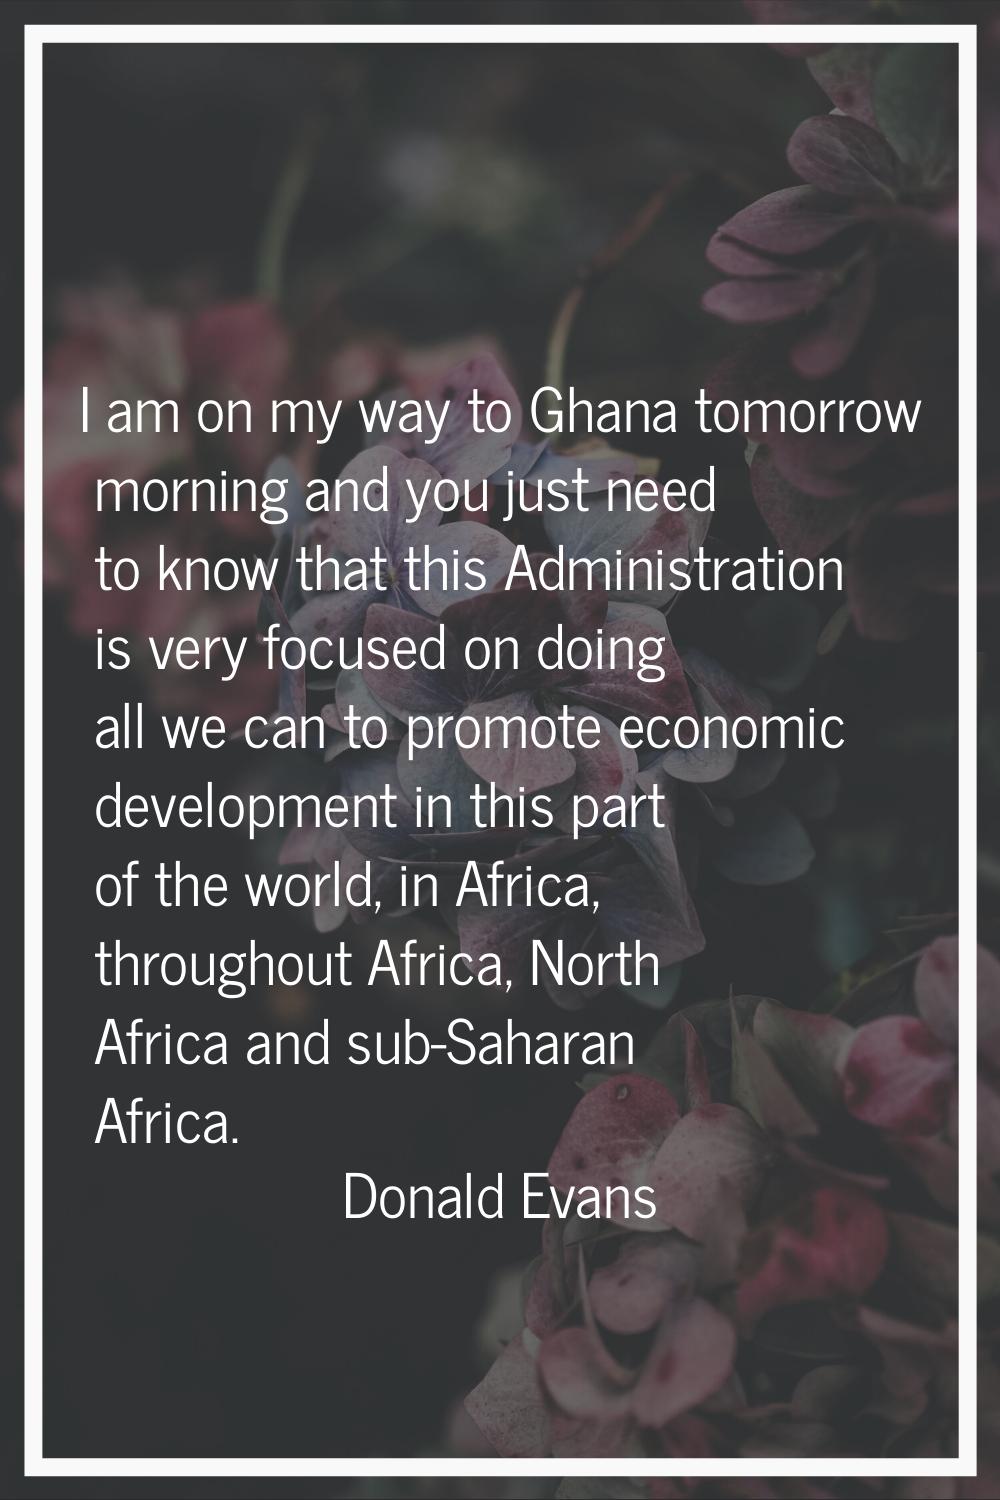 I am on my way to Ghana tomorrow morning and you just need to know that this Administration is very